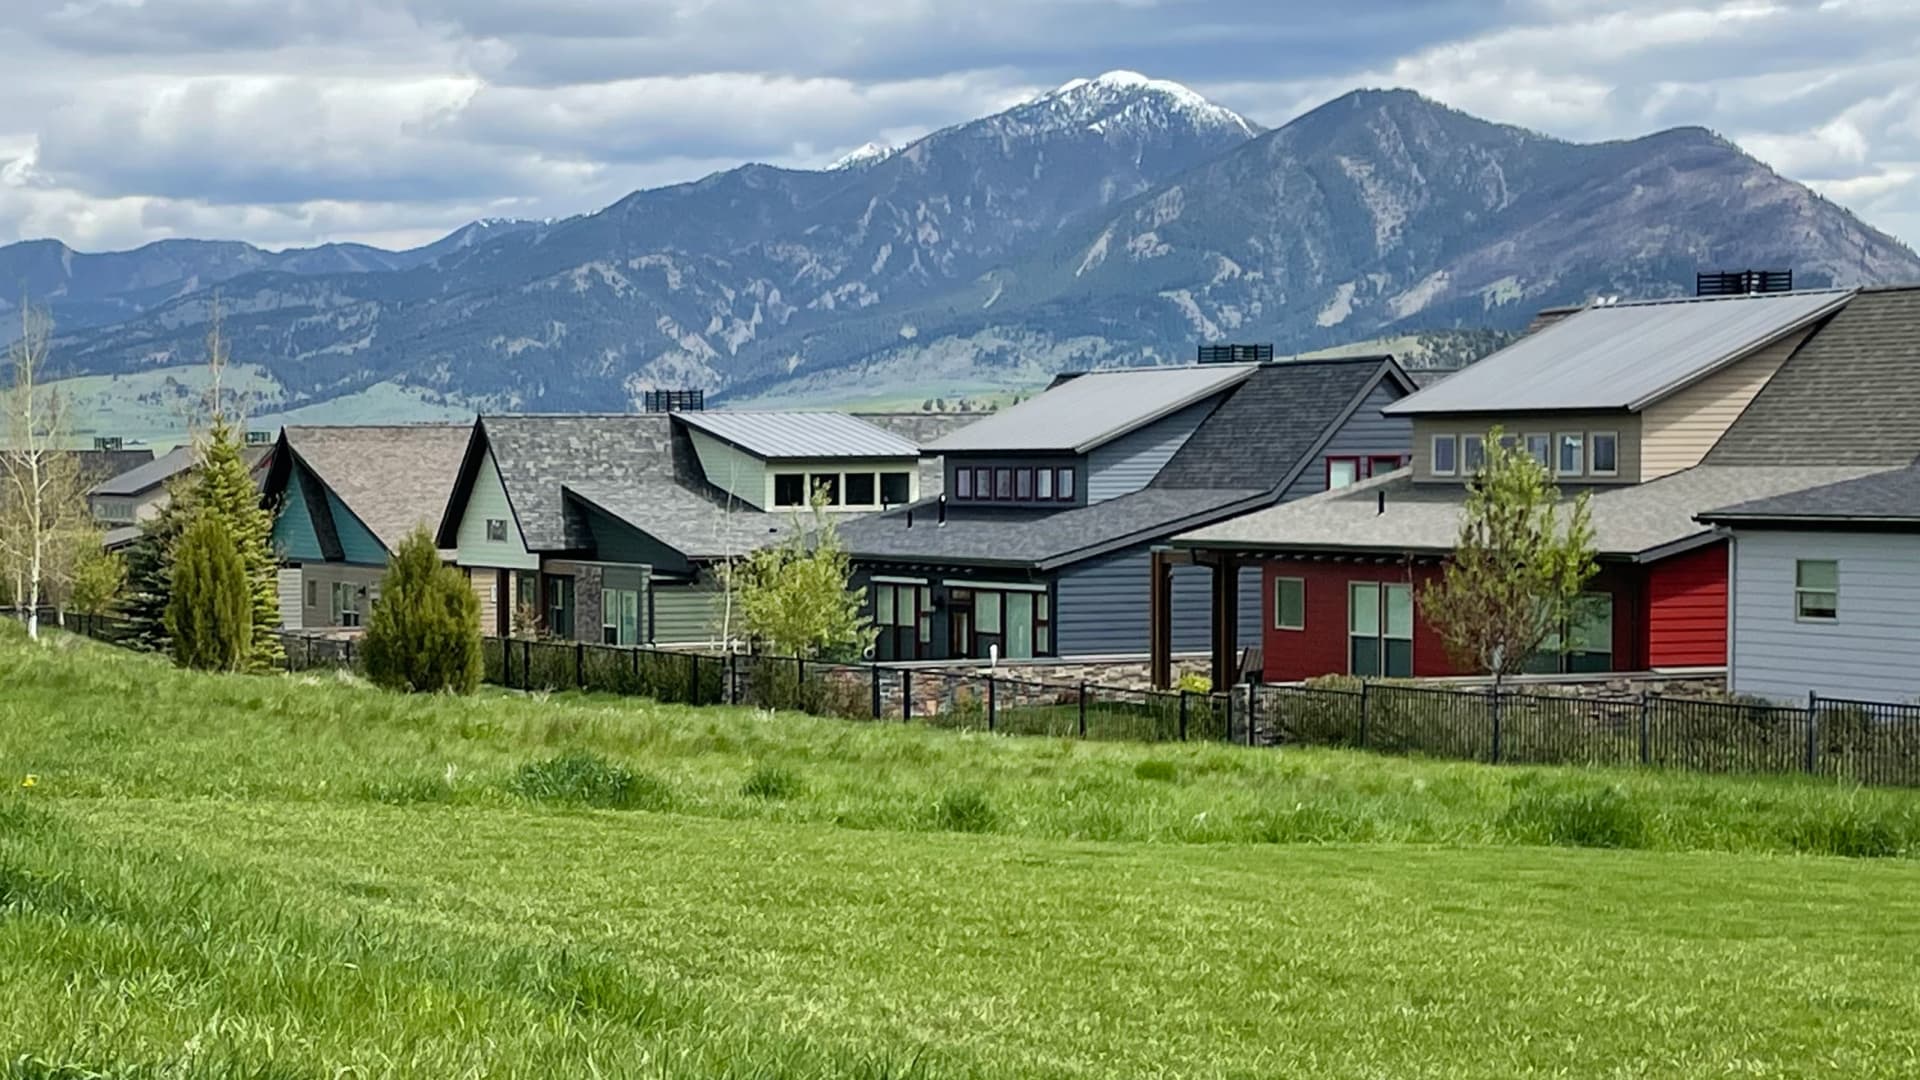 Montana Housing Prices Soar: A 55-and-older community in Bozeman.